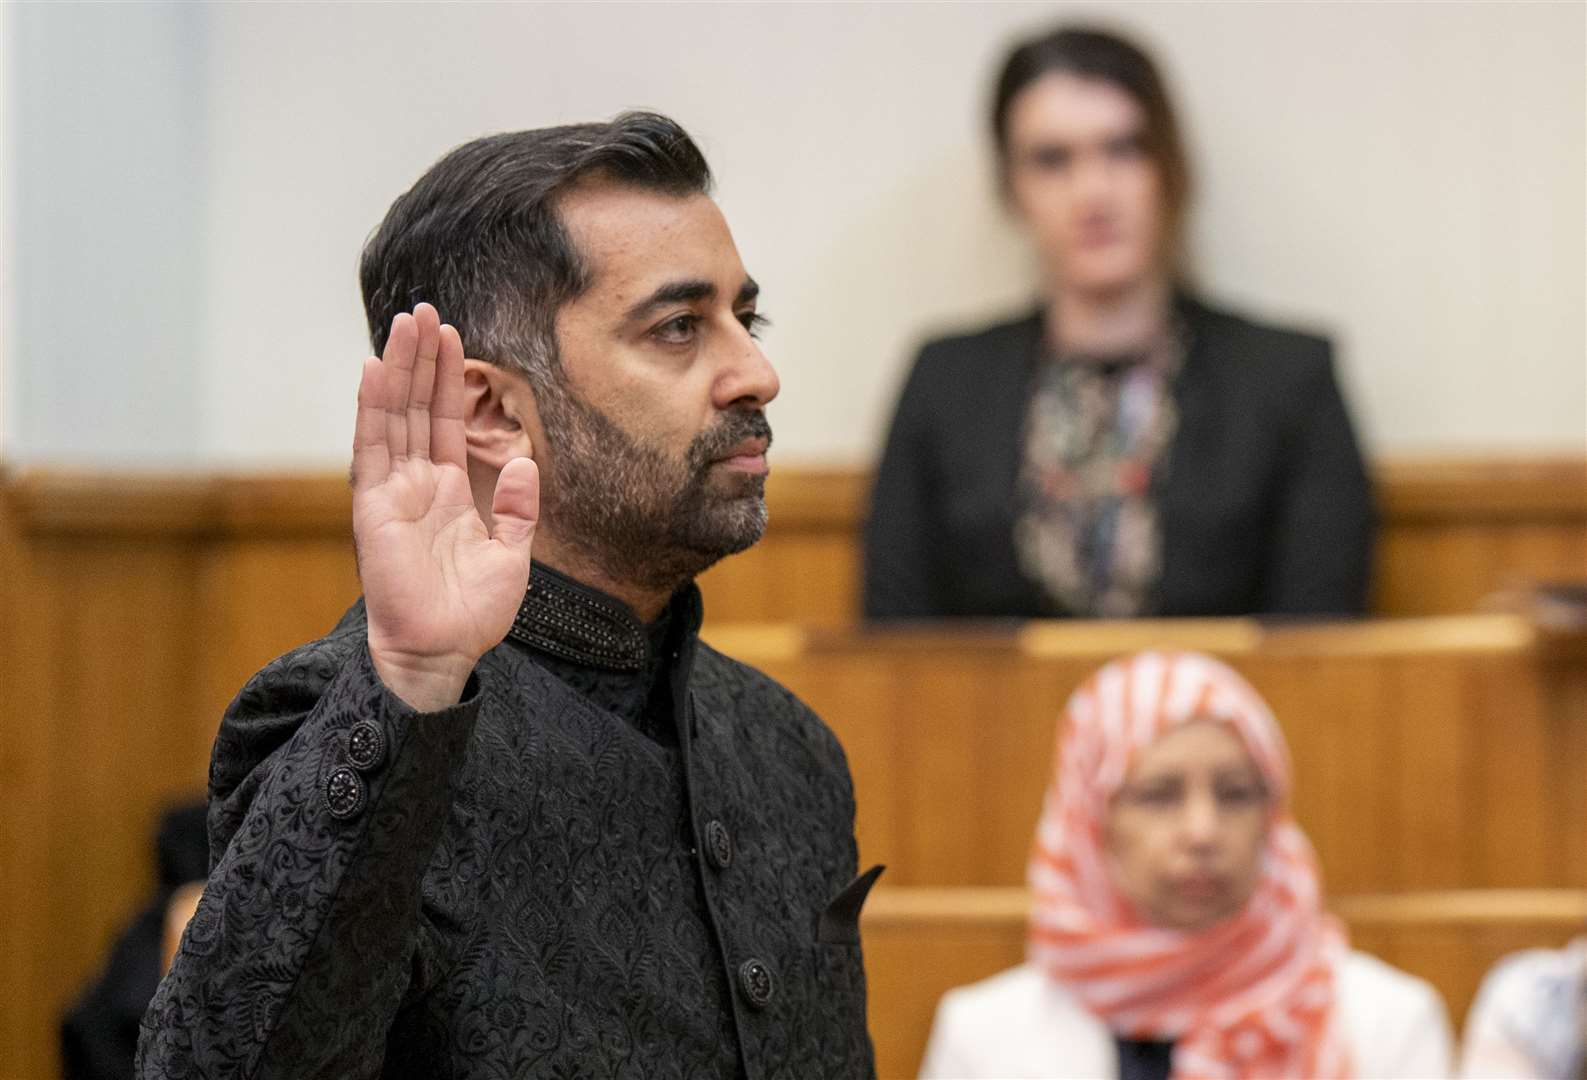 Humza Yousaf takes the oath as he is sworn in as First Minister of Scotland (Jane Barlow/PA)